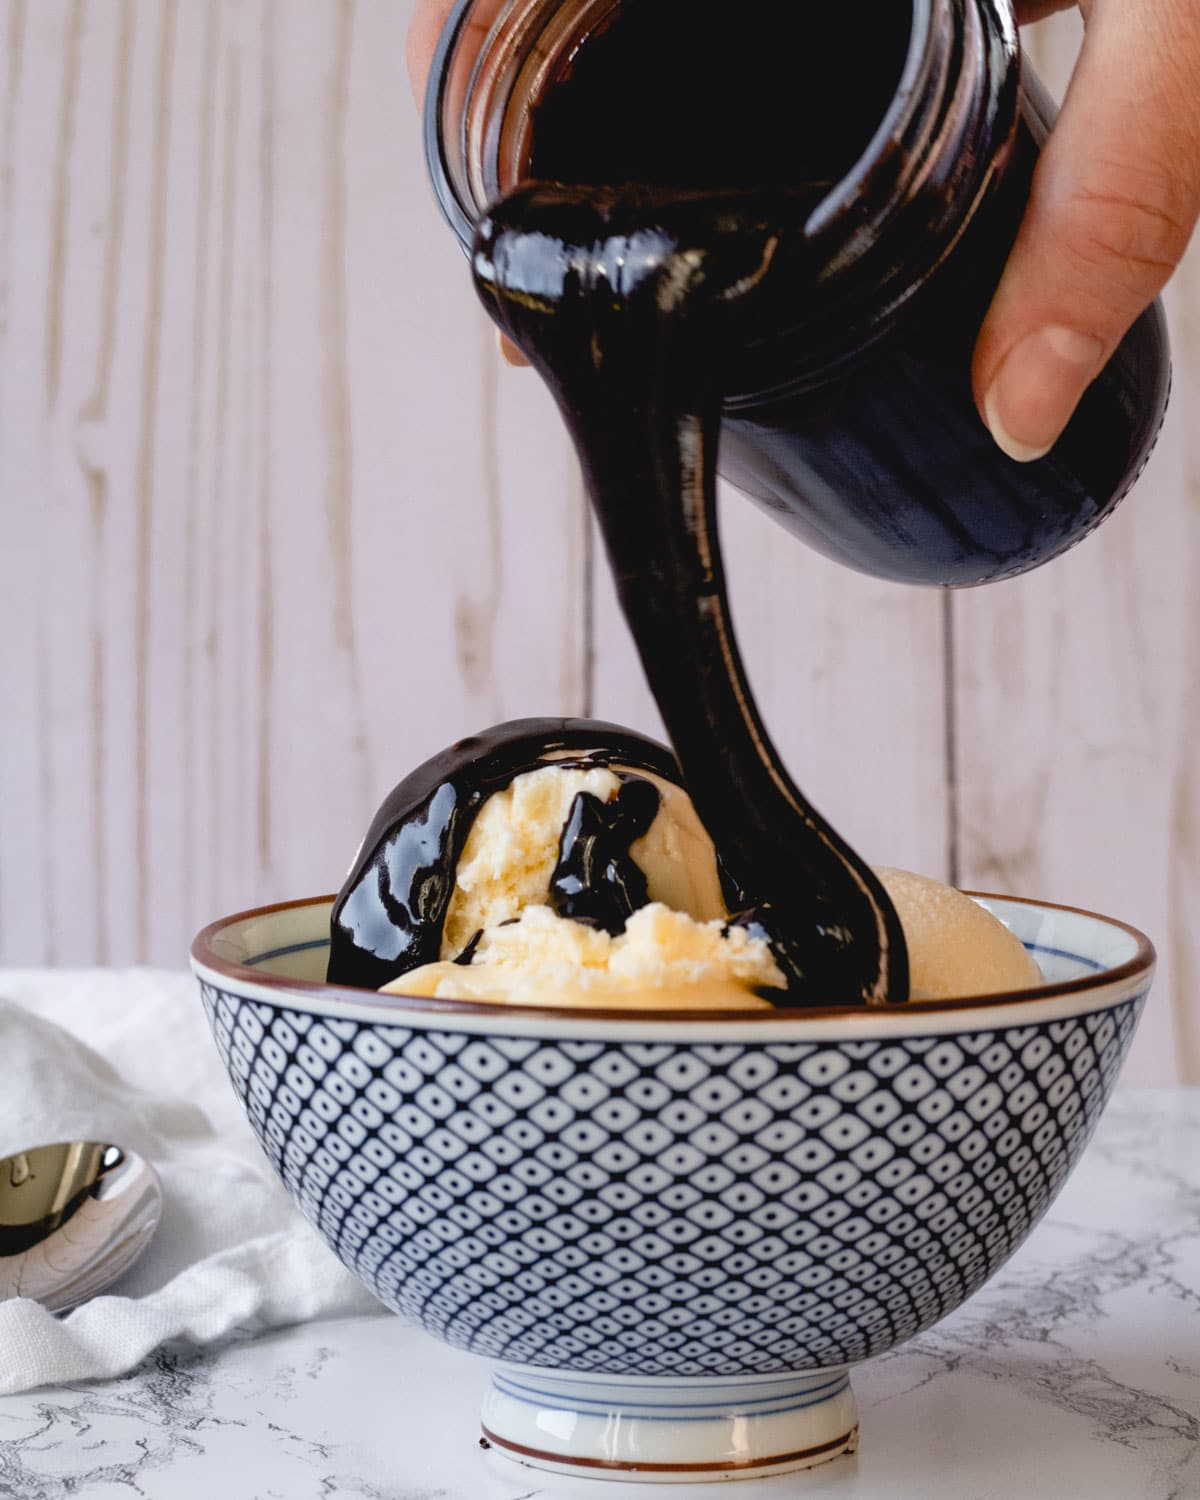 Pouring hot fudge from a mason jar onto a bowl of ice cream.